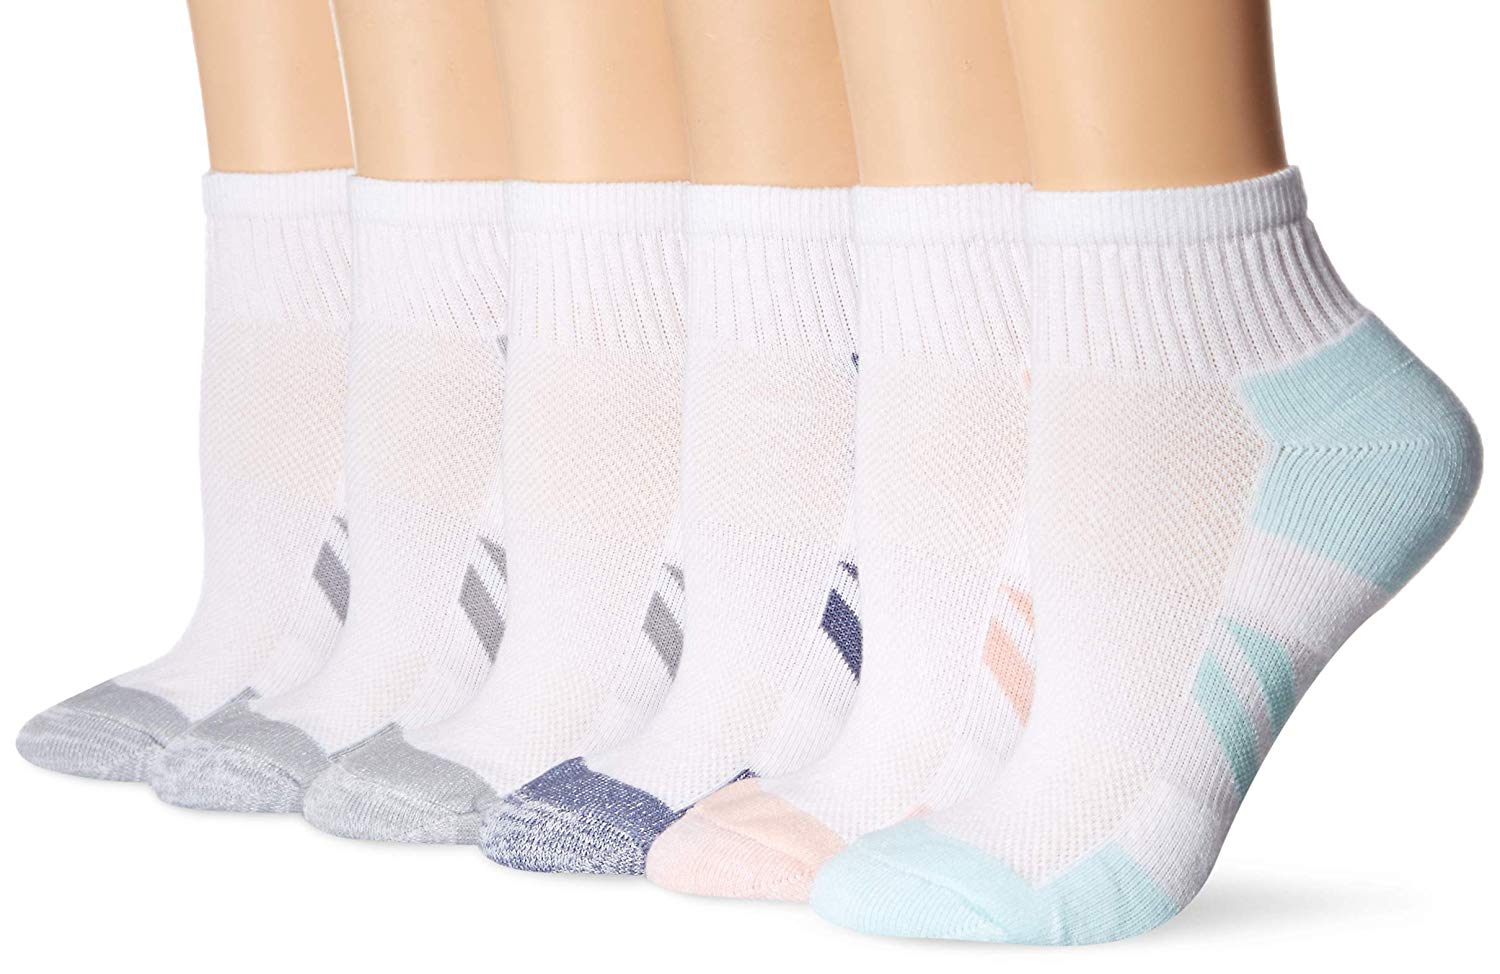 Essentials Women's 6-Pack Performance Cotton Cushioned, White, Size 8.0 |  eBay